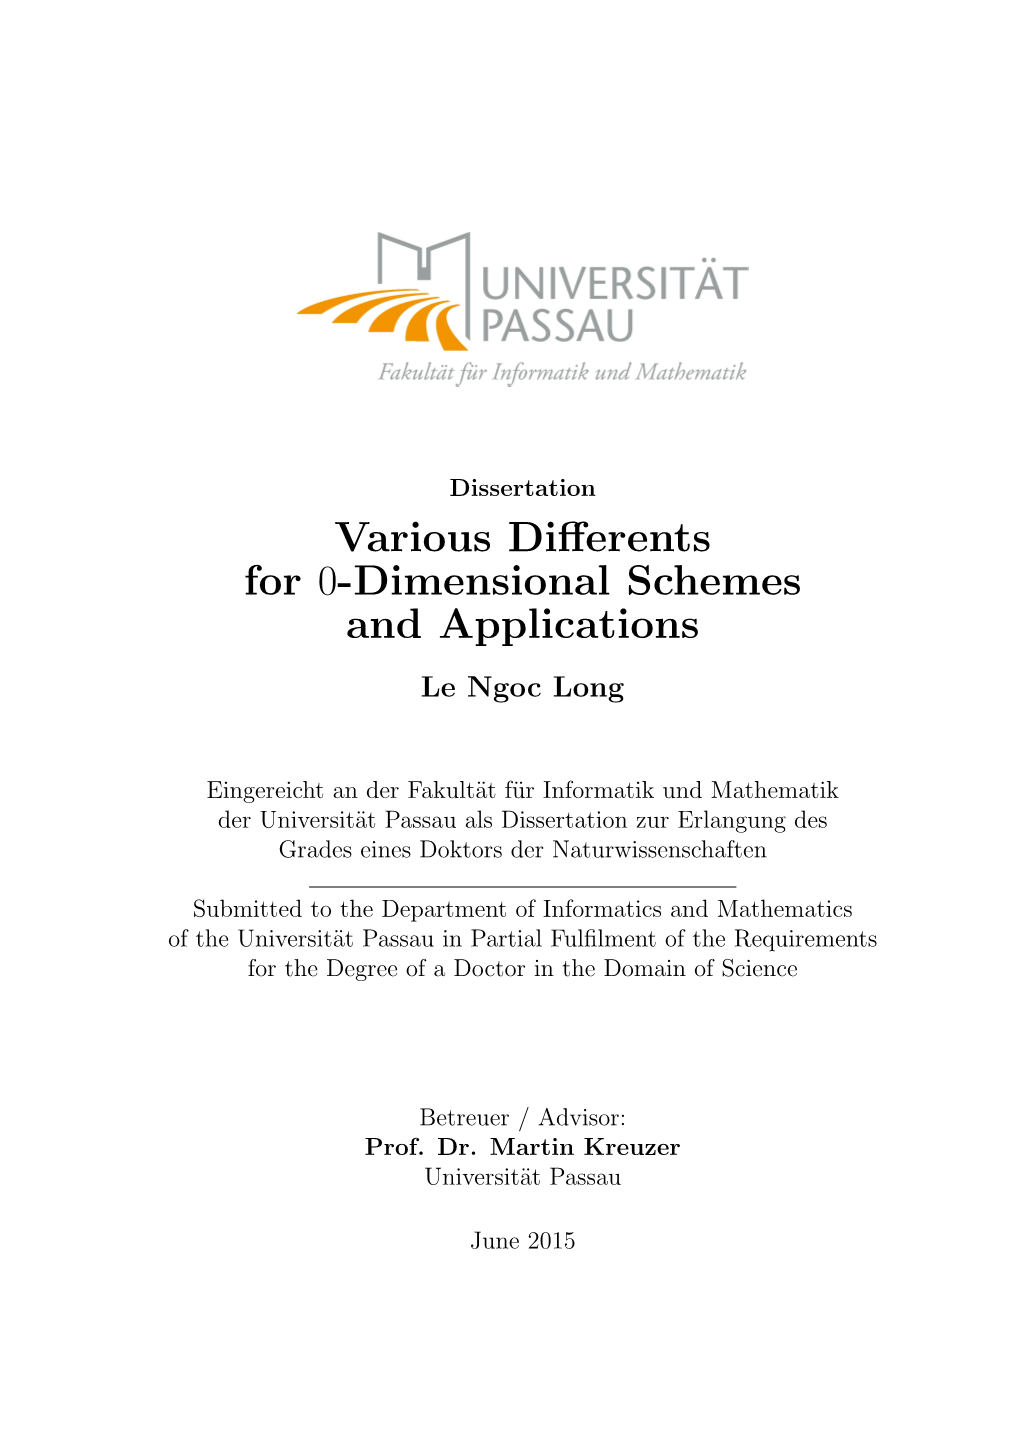 Various Differents for 0-Dimensional Schemes and Applications